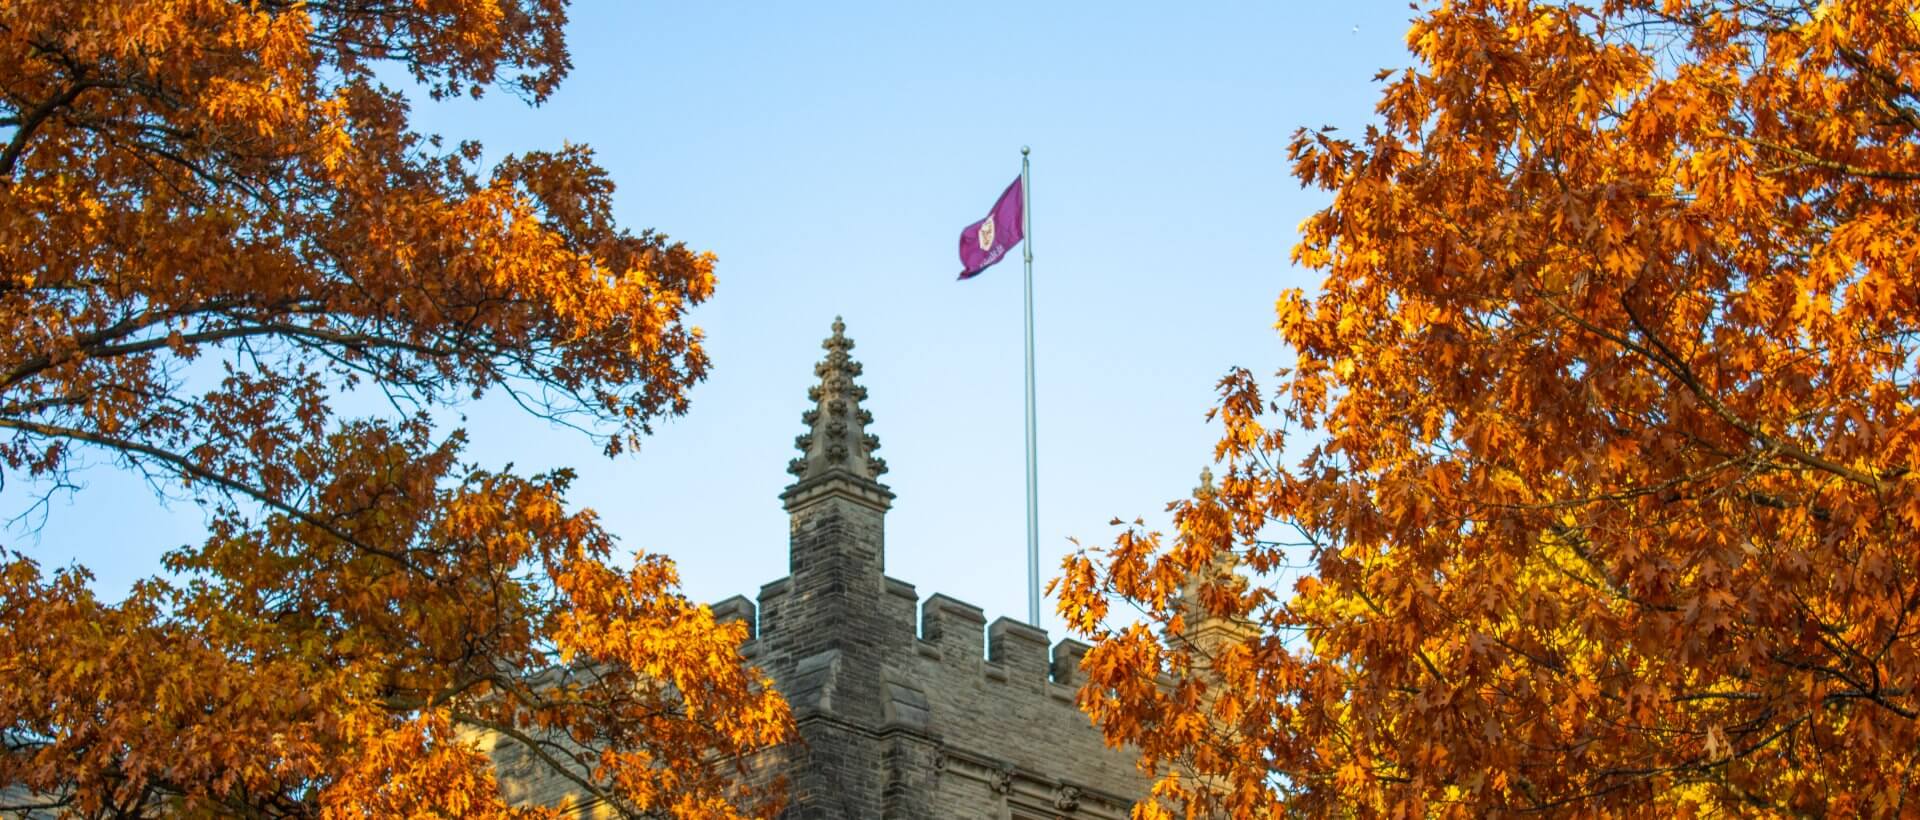 Fall season in campus, yellow leaves around the University Hall. There is a McMaster maroon flag.